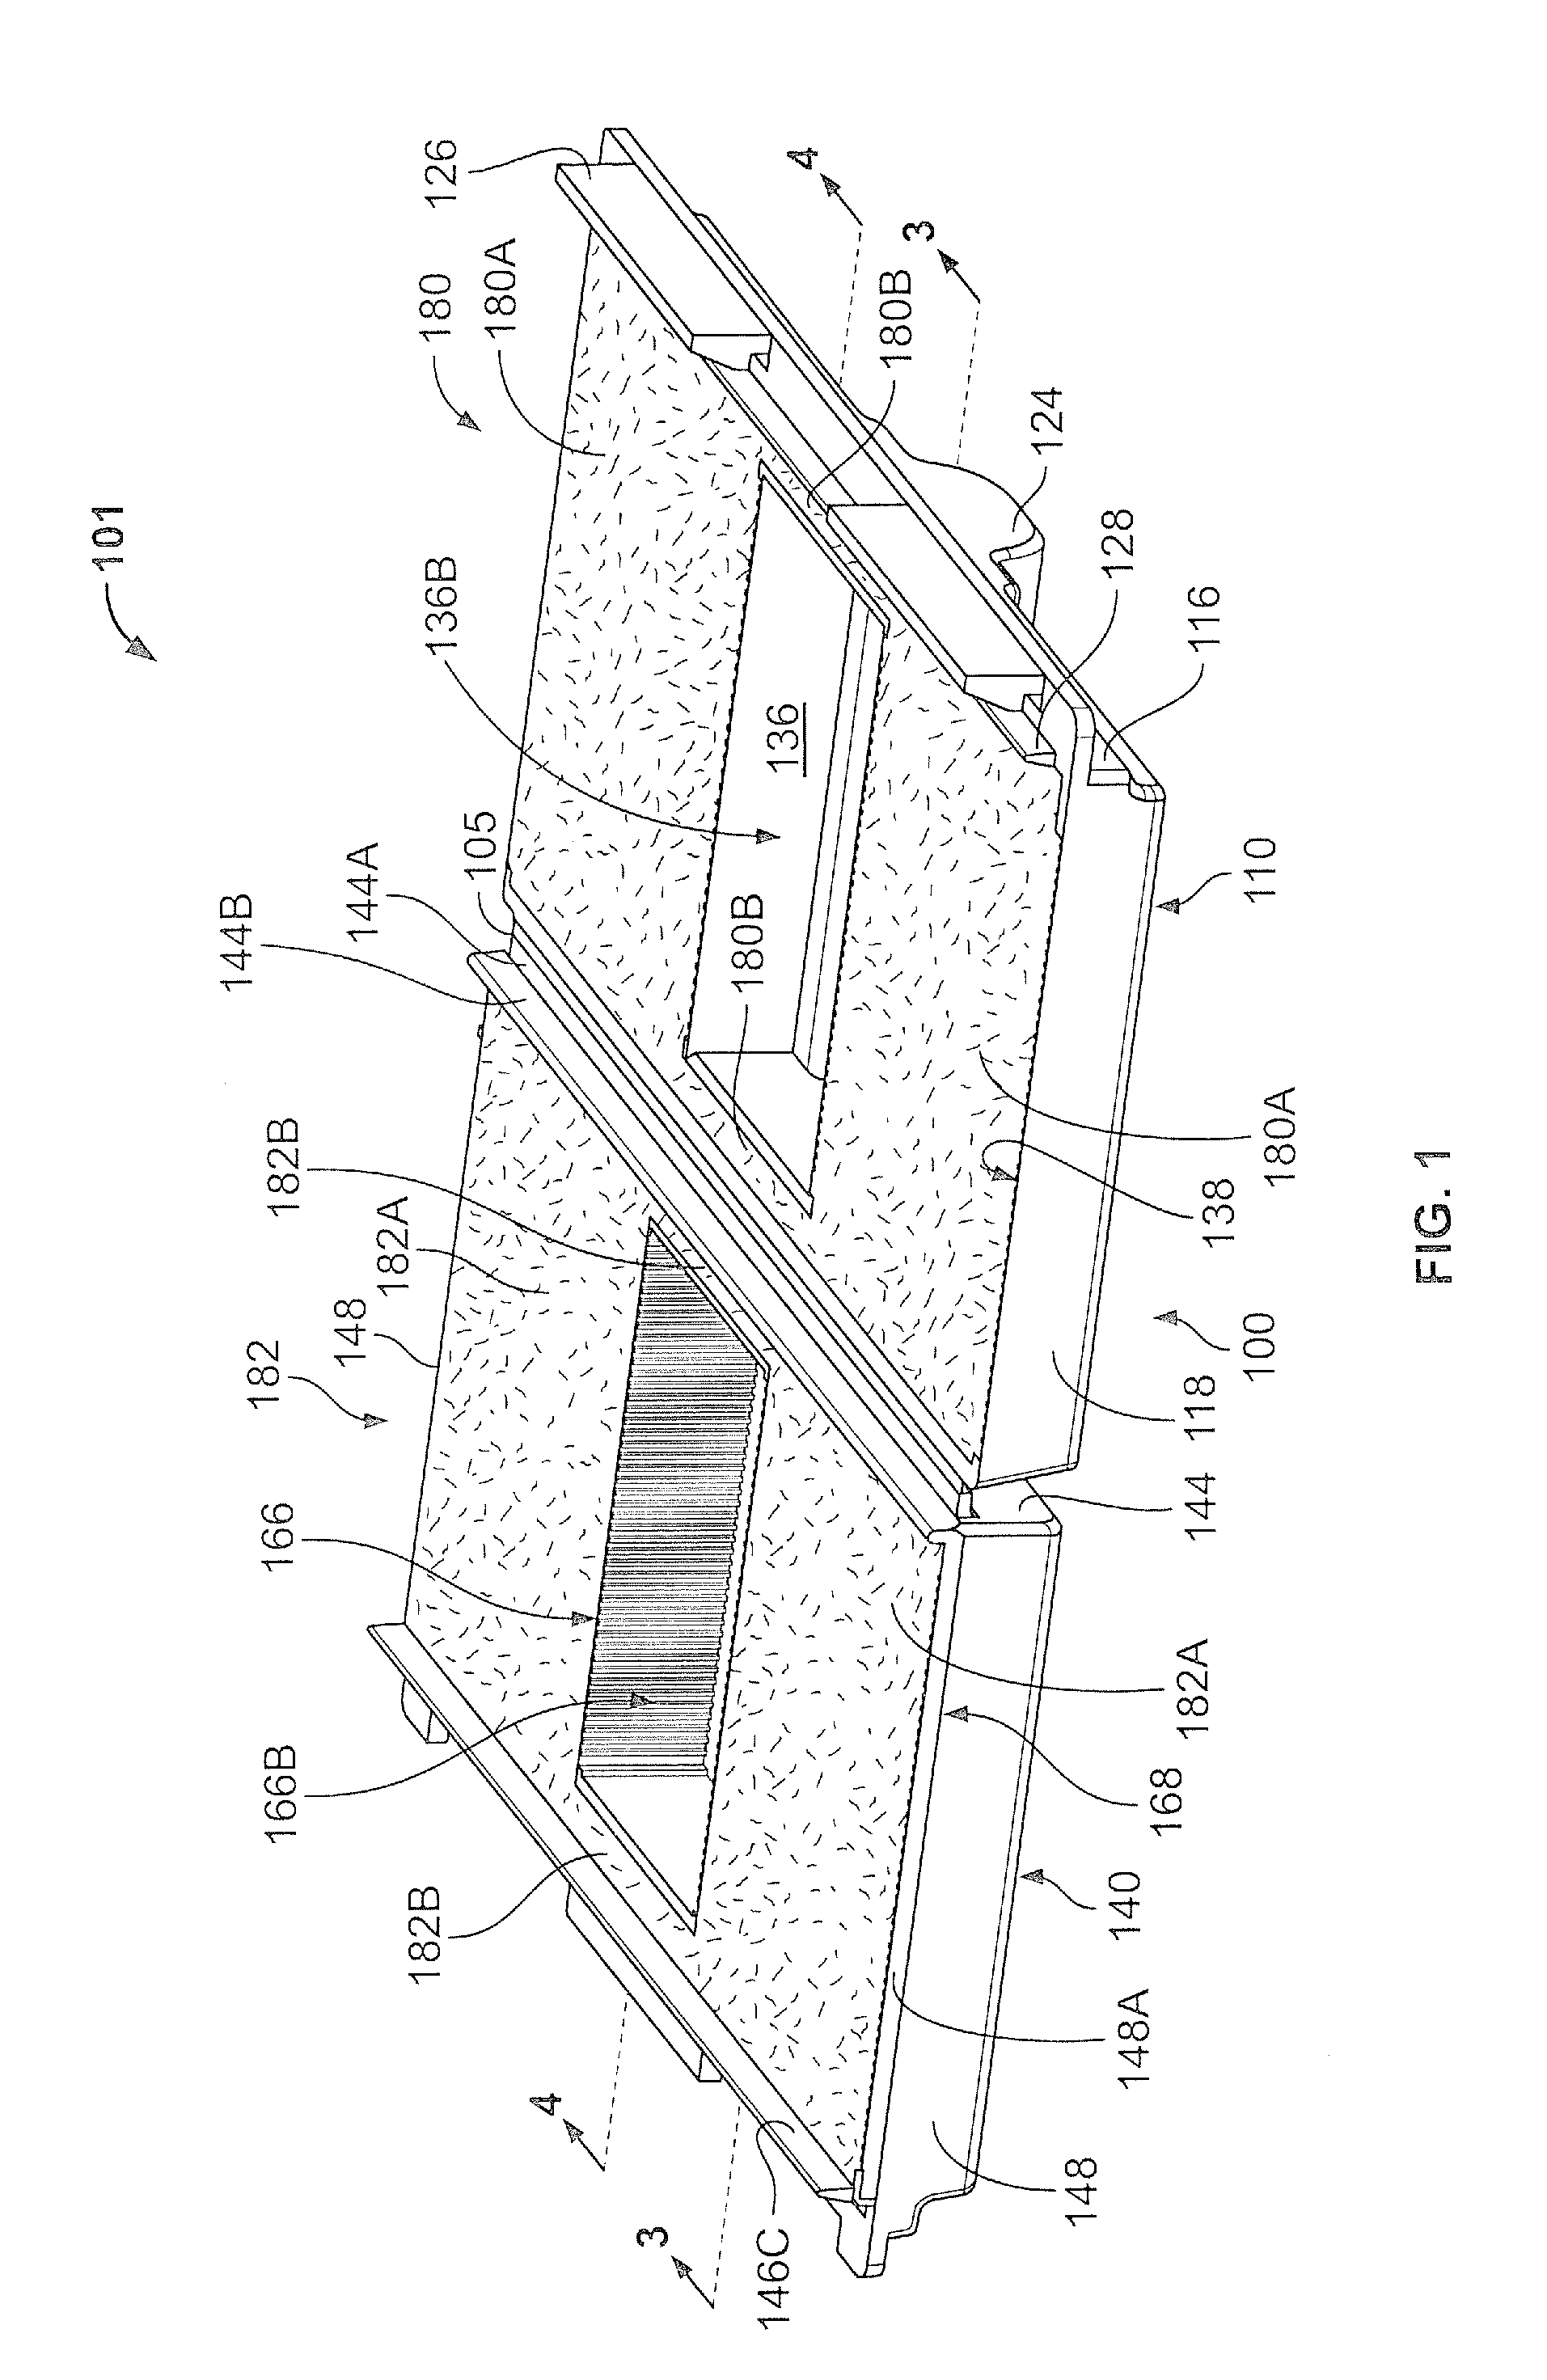 Sealant-filled enclosures and methods for environmentally protecting a connection